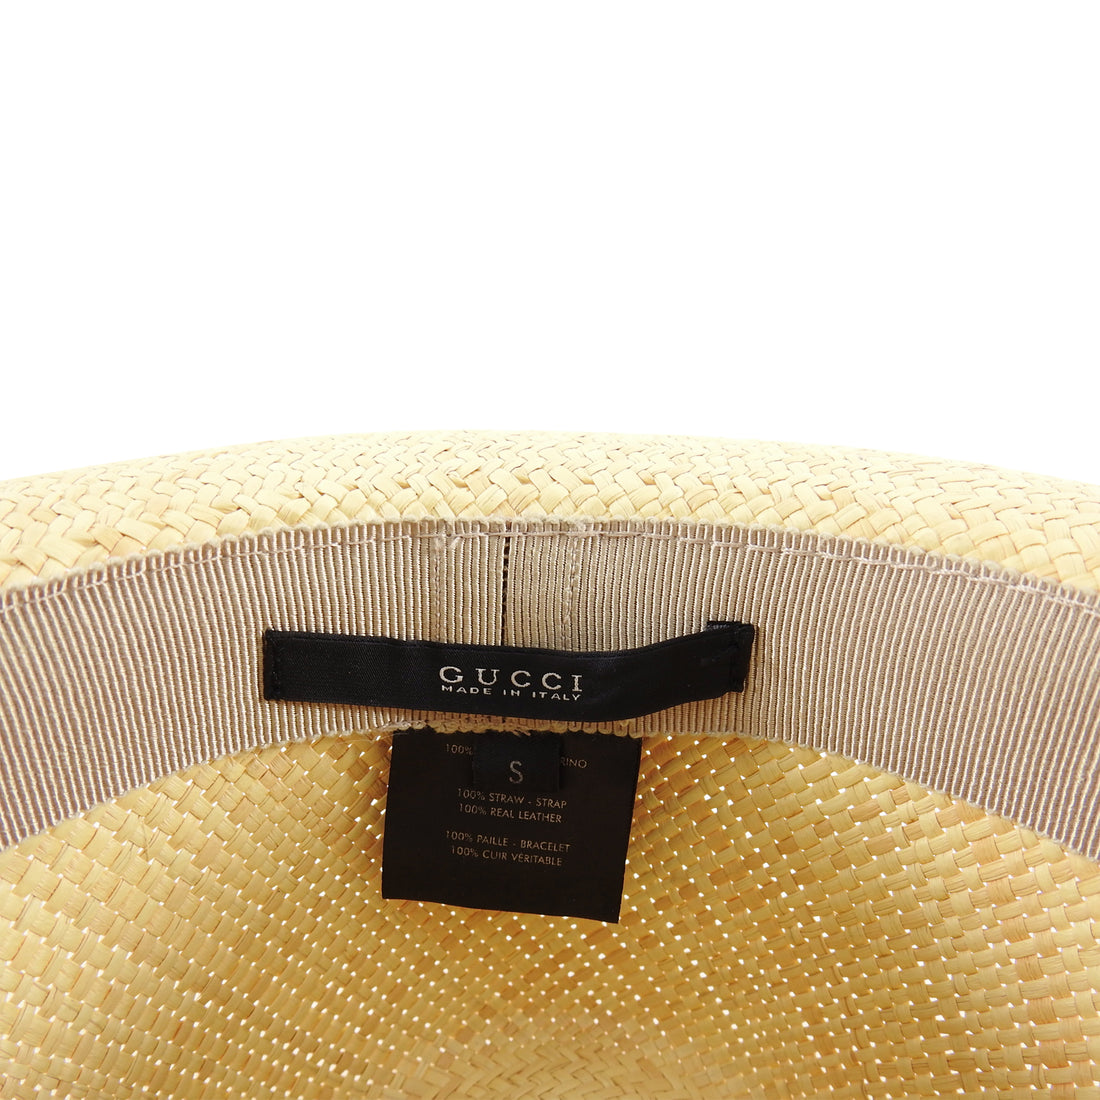 Gucci Straw Fedora Hat with Taupe Leather Band - S